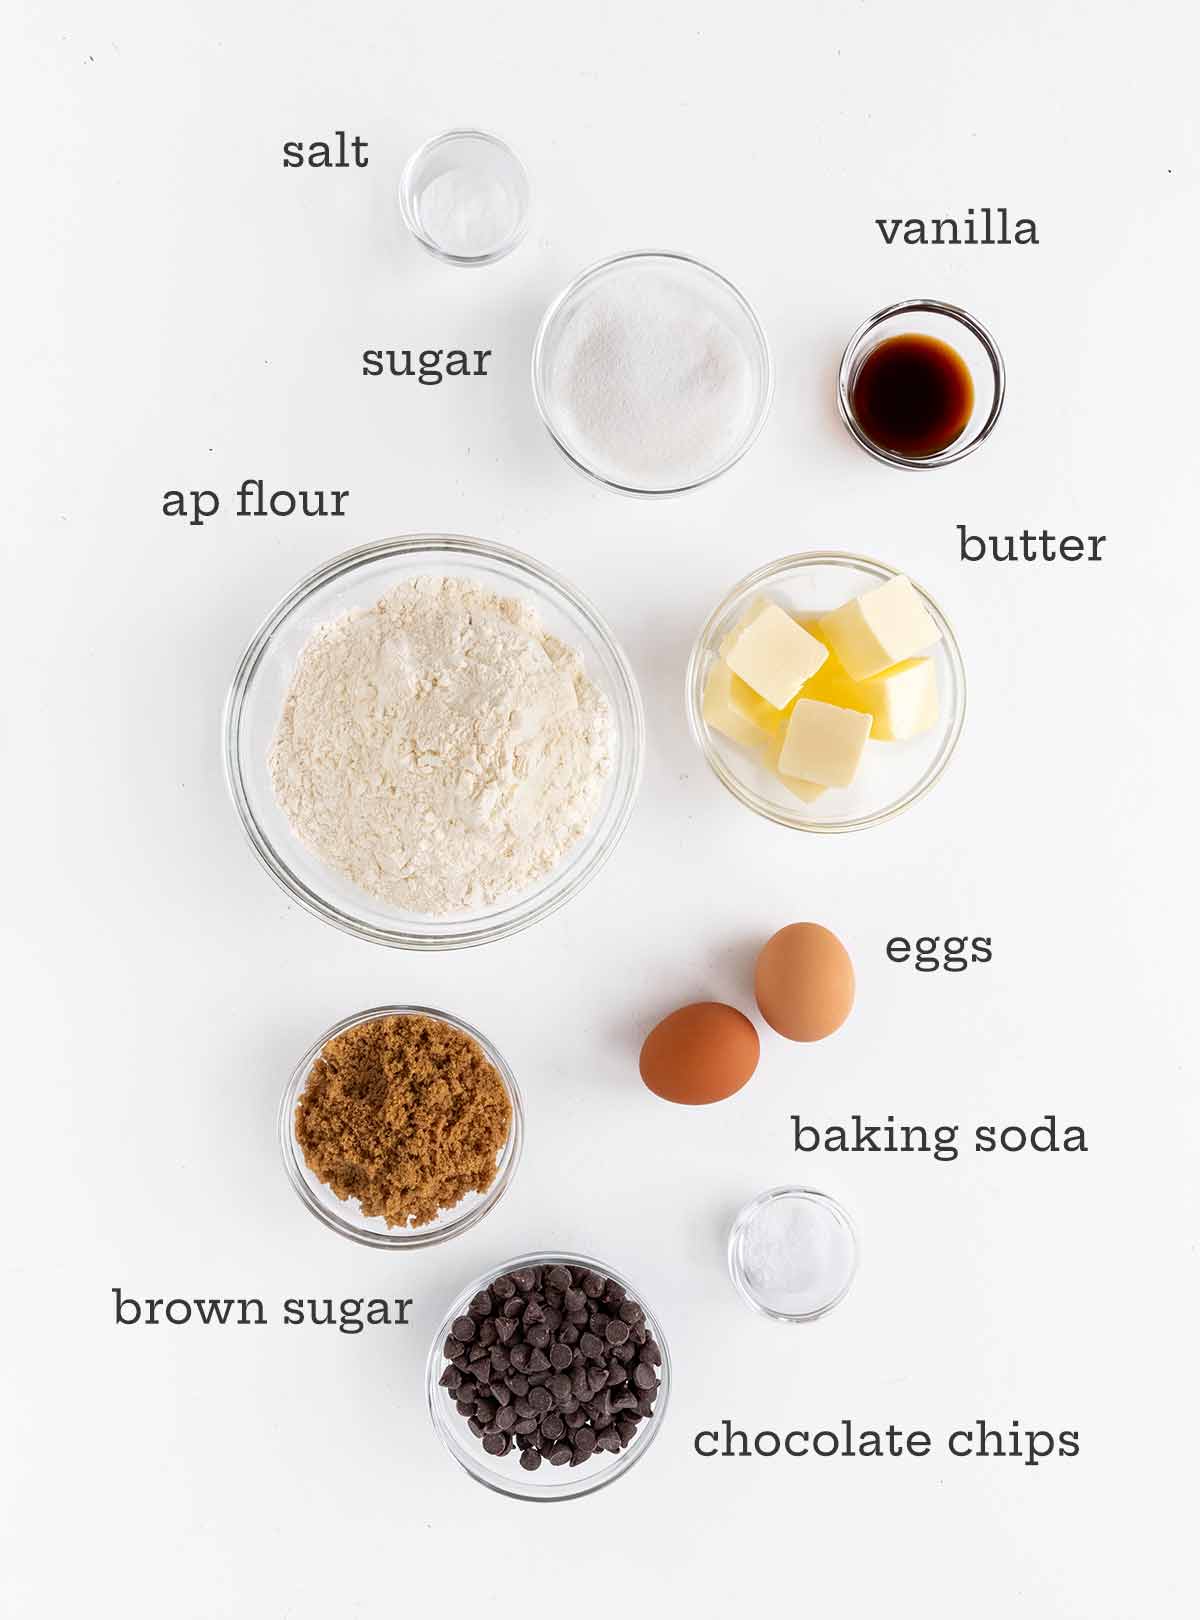 Ingredients for soft chocolate chip cookies -- flour, butter, eggs, sugar, vanilla, salt, baking soda, and chocolate chips.